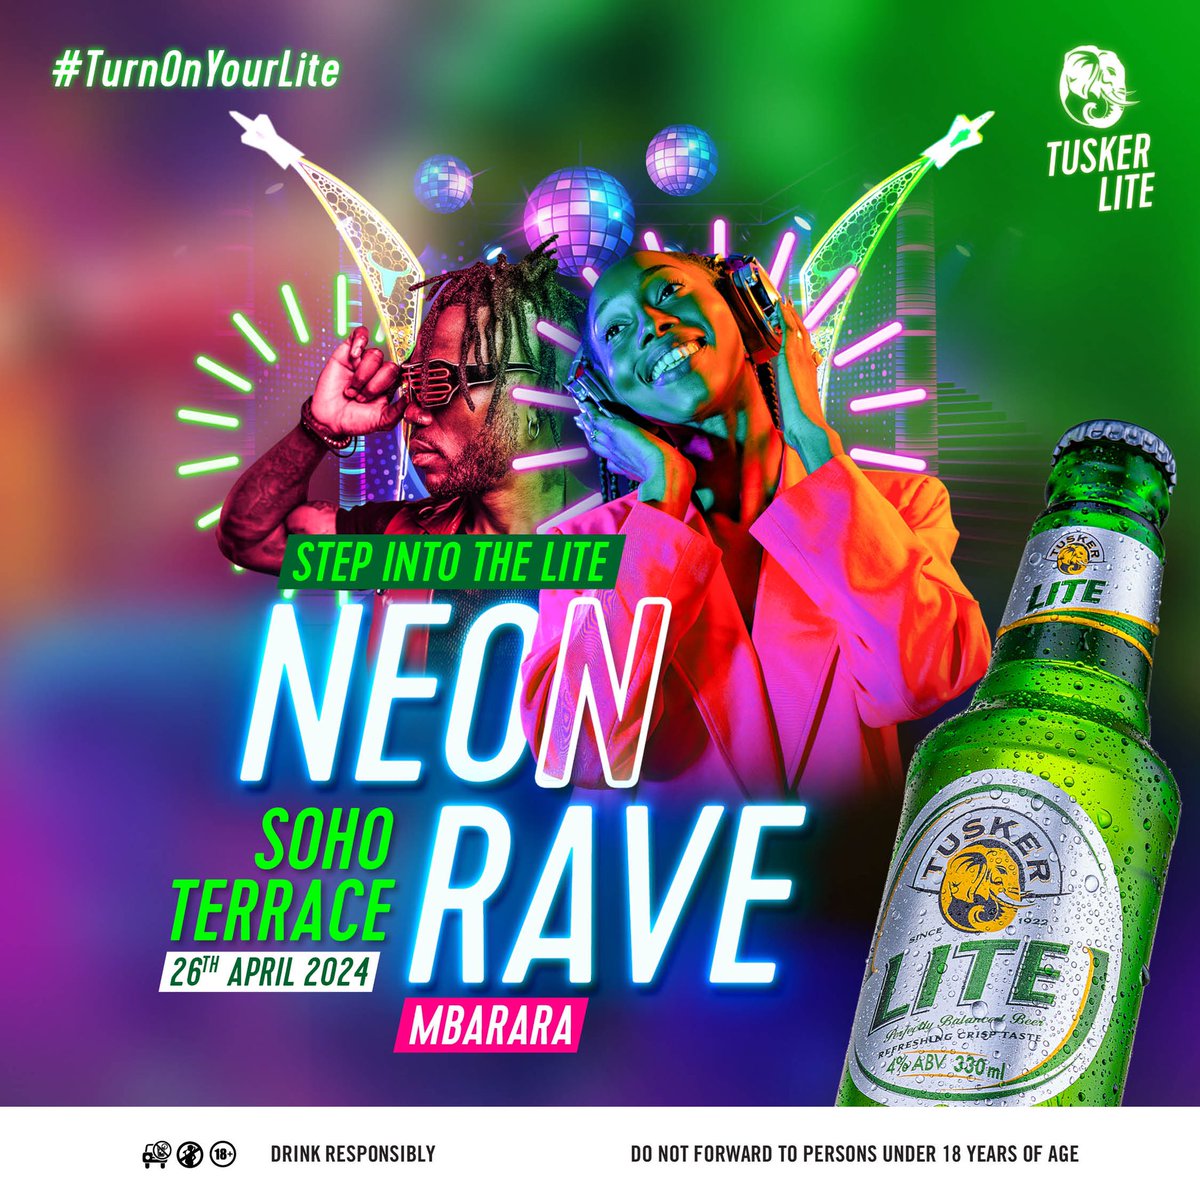 Mbarara we gat good news for y’all #NeonRaveMbarara is happening on 26th April 2024 at SoHo Terrace #TurnOnYourLite for an experience 🔥 Brought to you by @tuskerlite256, @solutions_ea & @d3concept